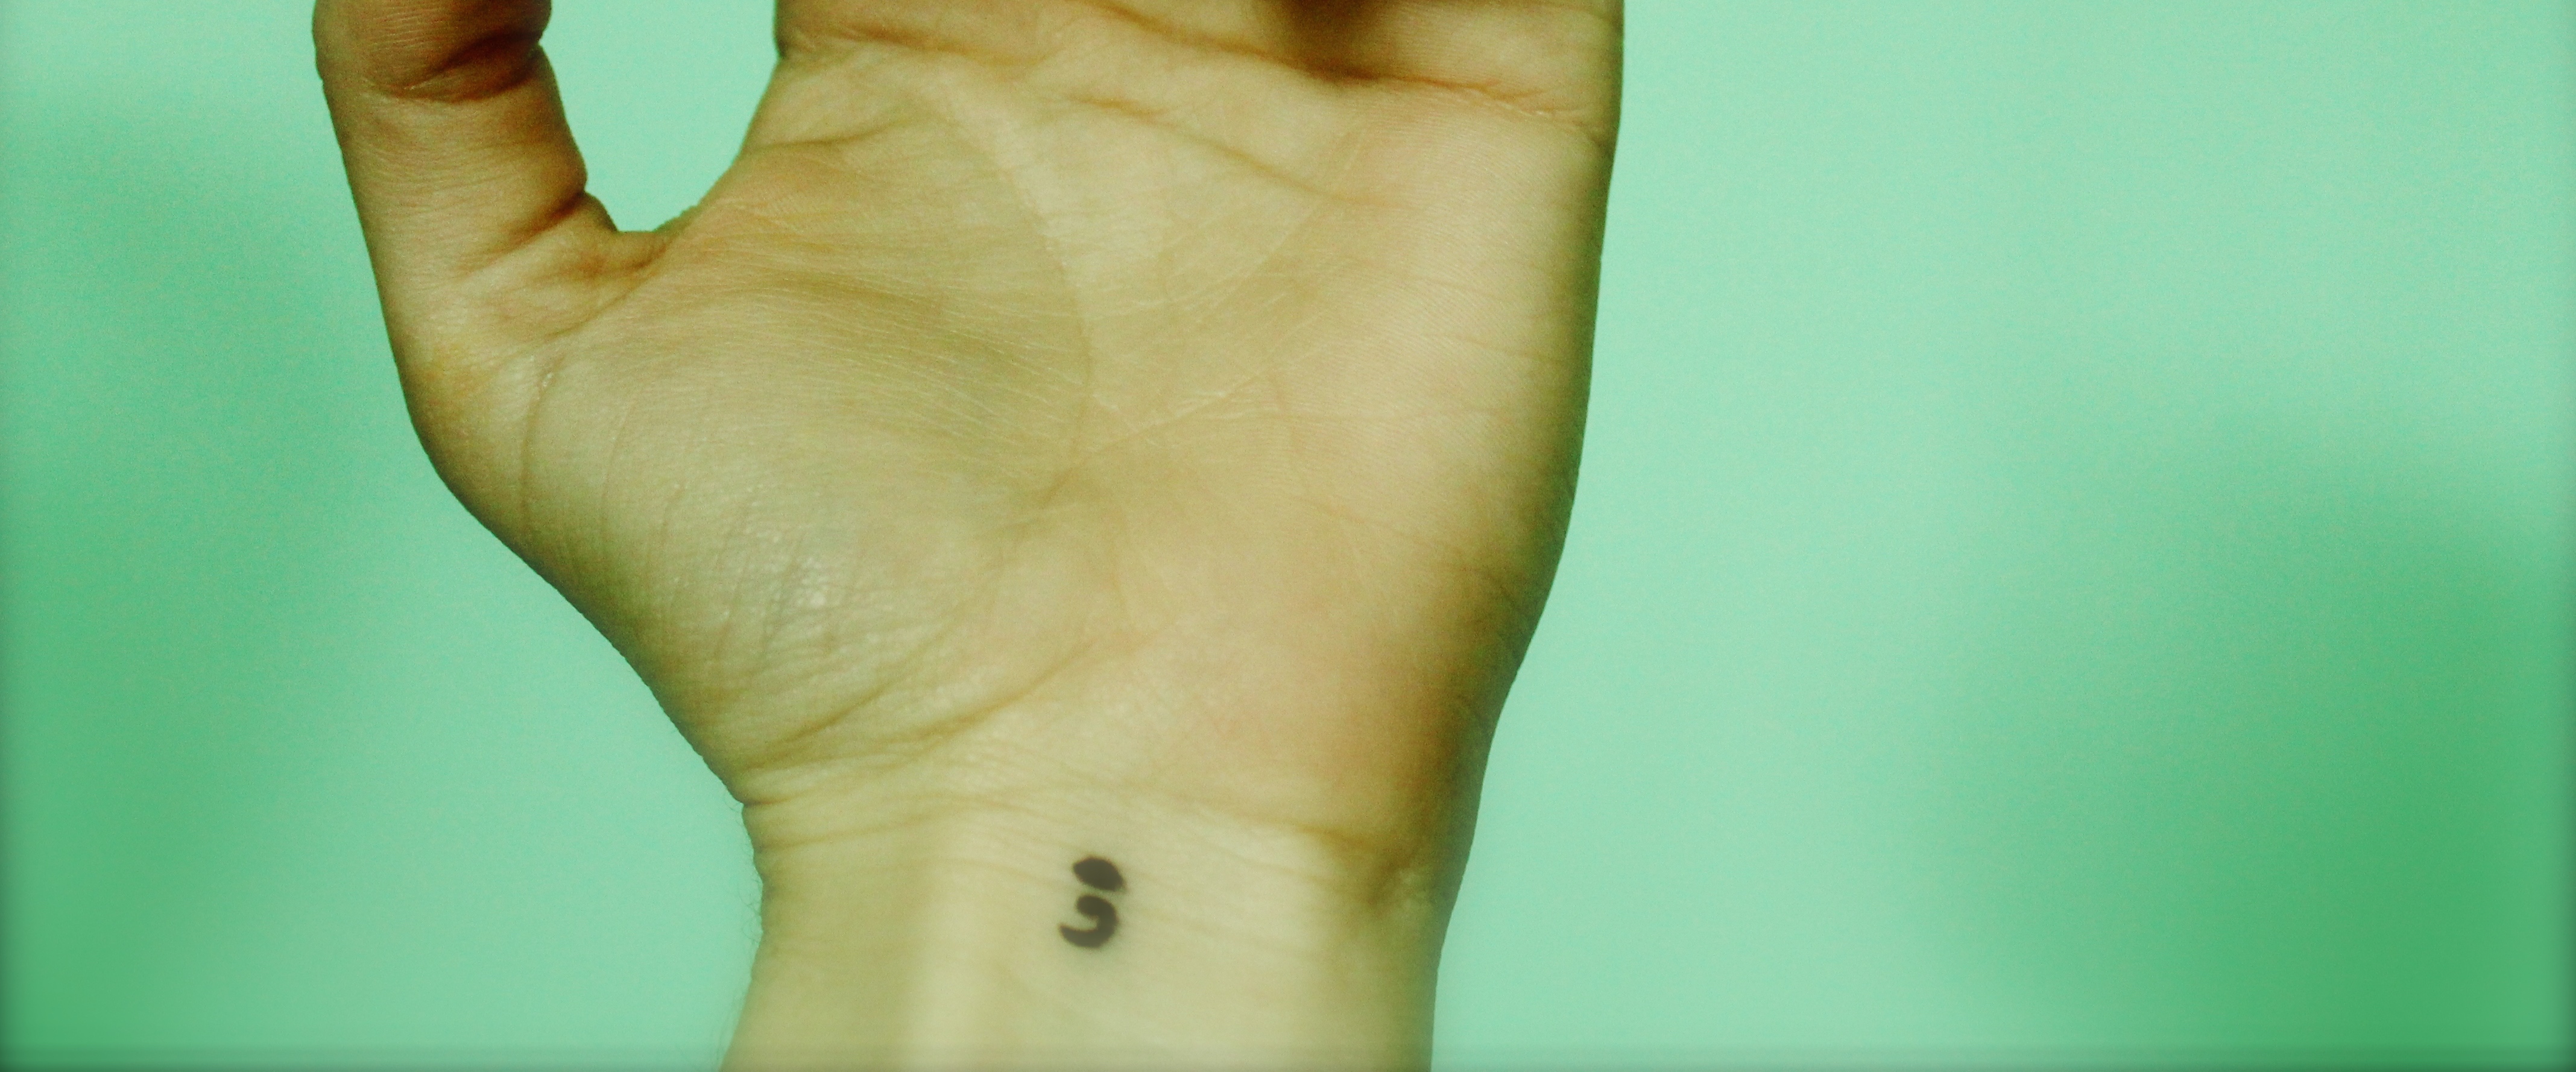 28 Beautiful Tattoos That Represent Eating Disorder Recovery